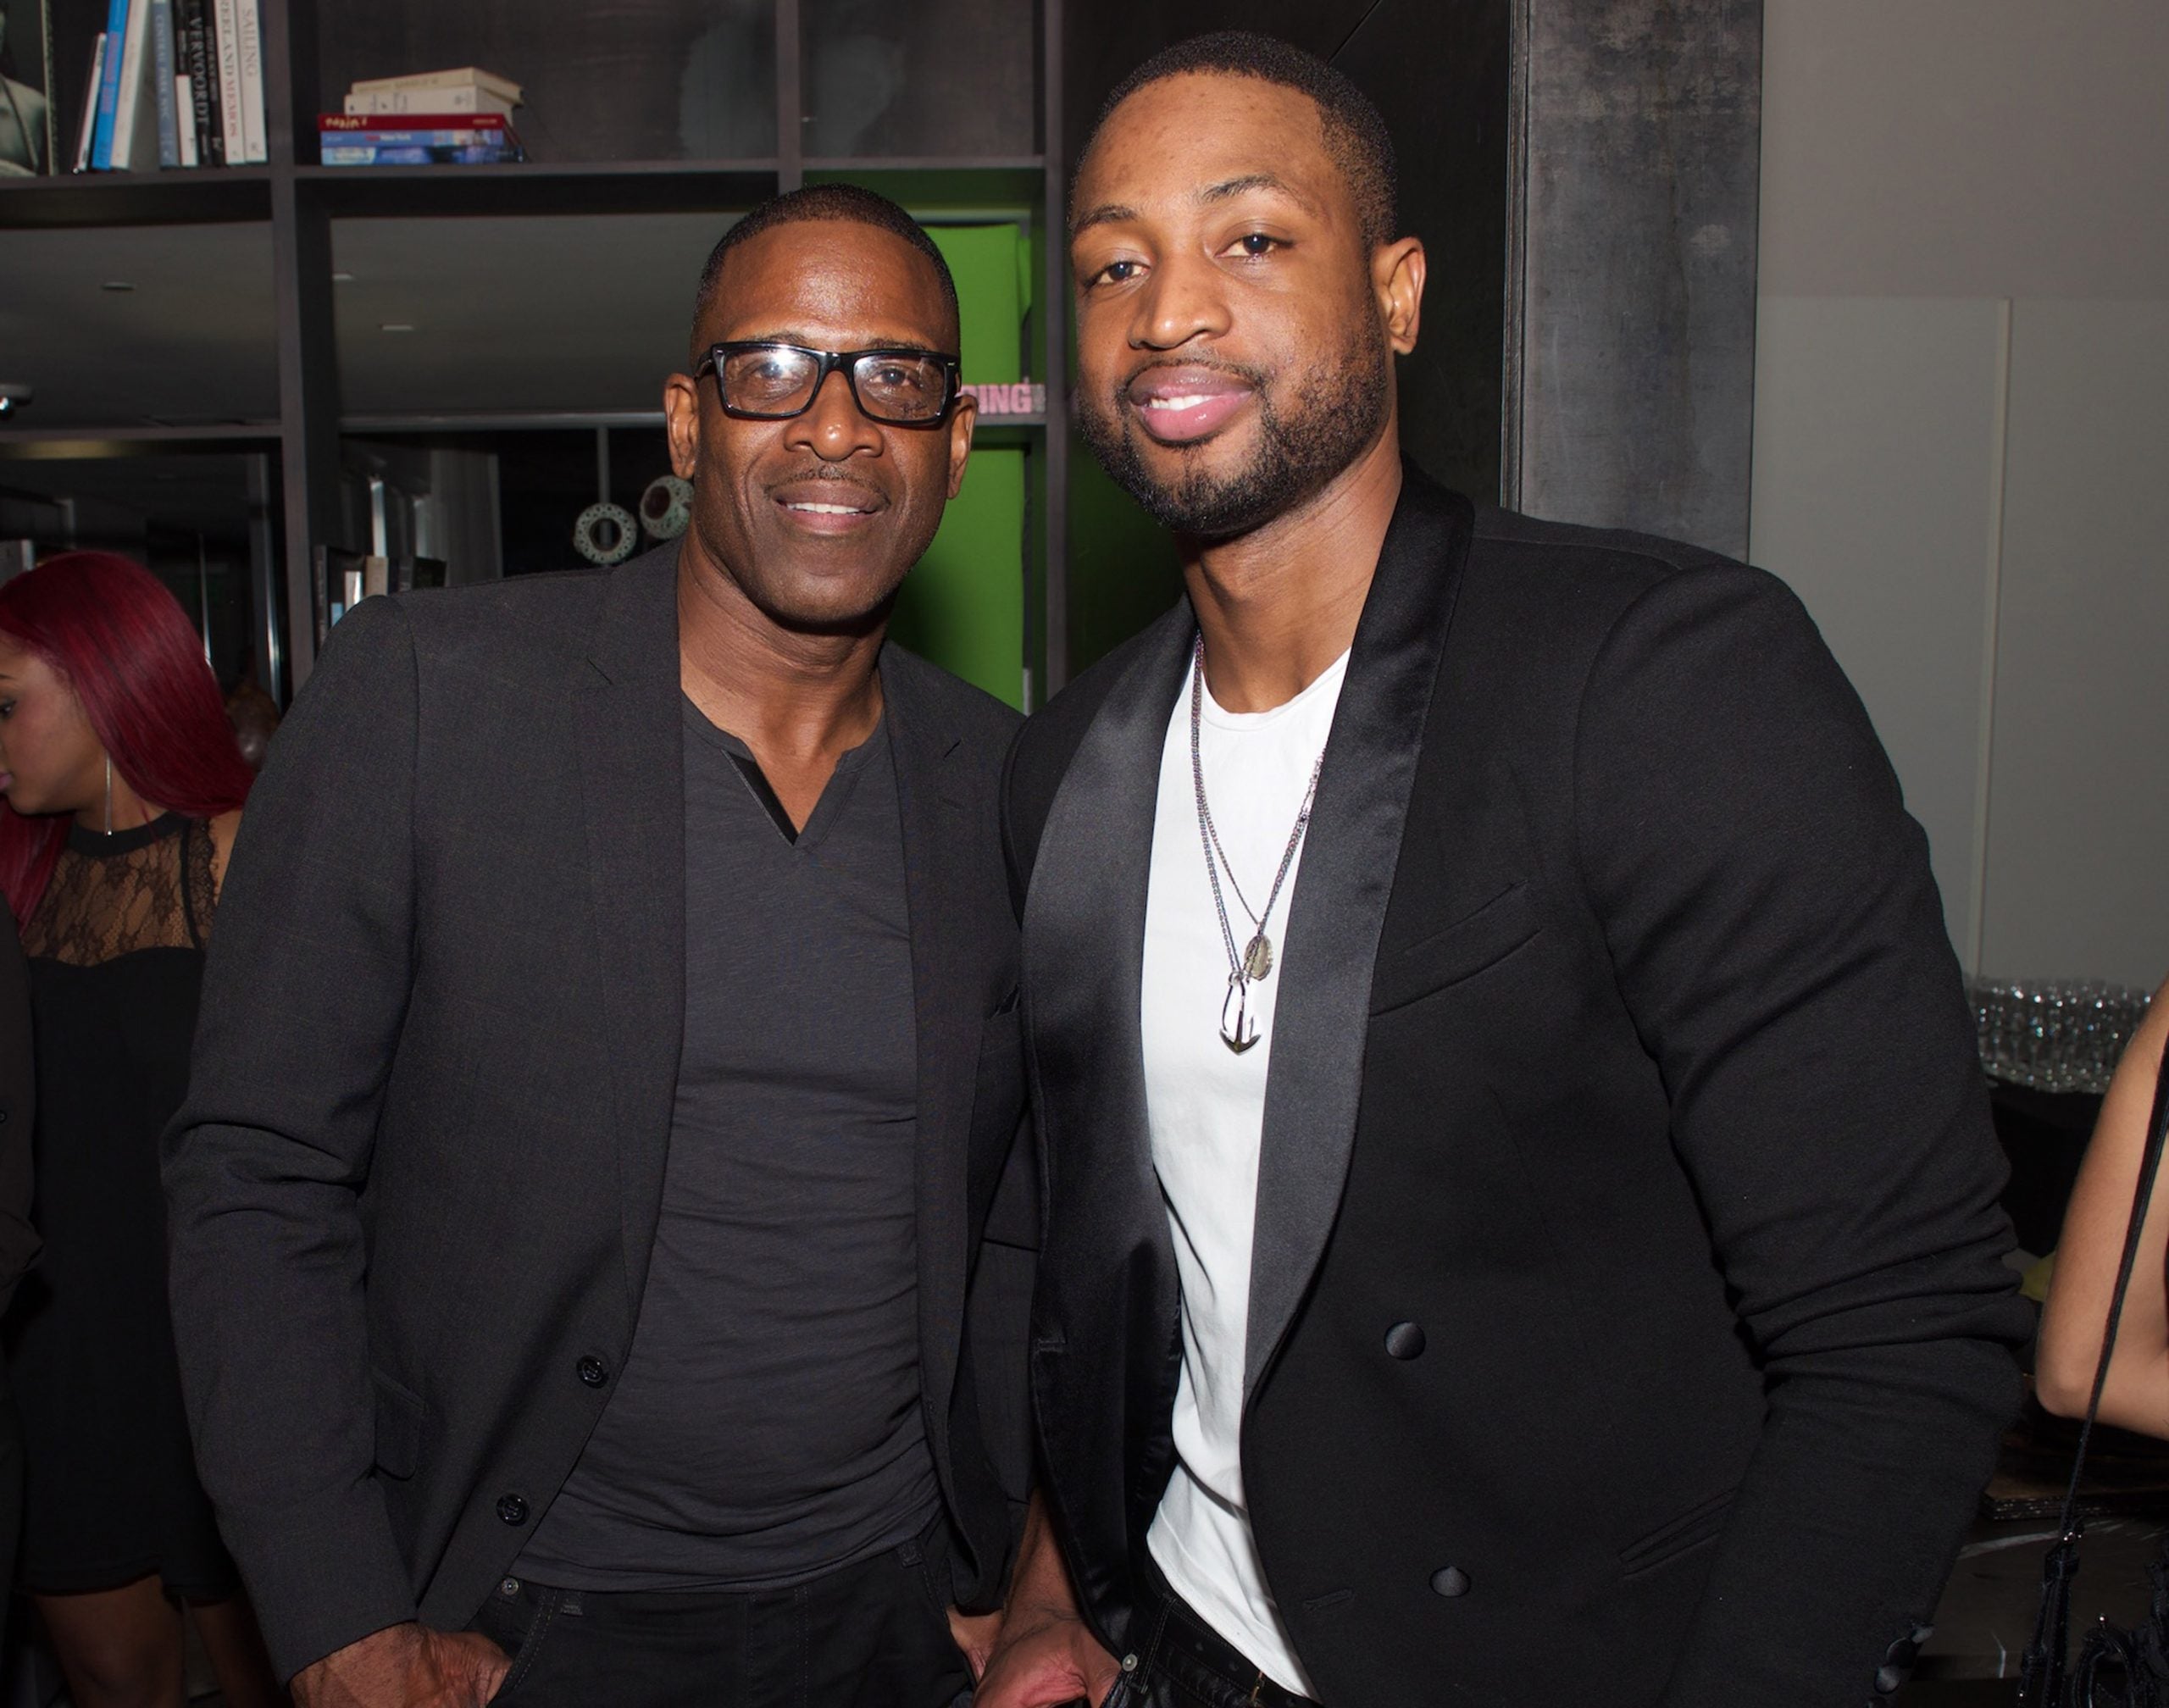 People Can't Believe This Is Dwyane Wade's Dad: 7 Photos Of Father And Son